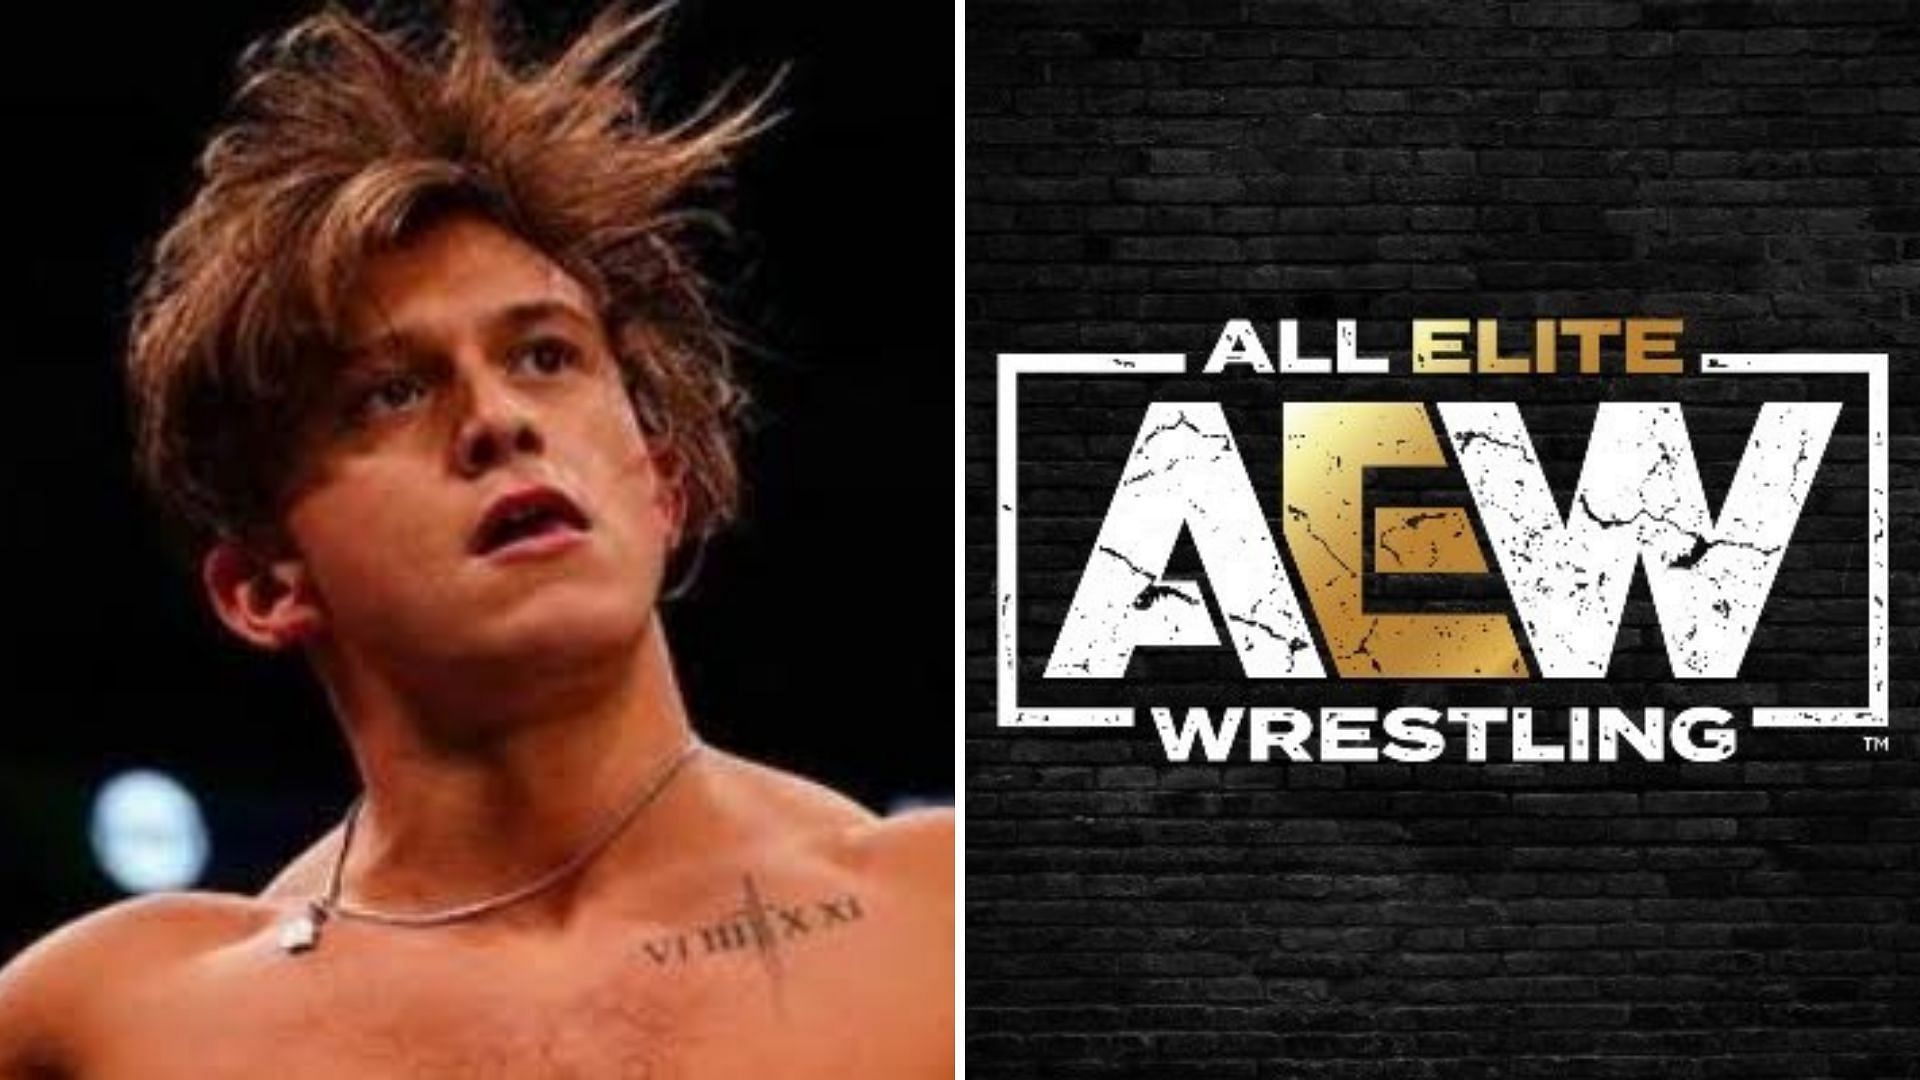 The youngster could become one of AEW&#039;s biggest homegrown stars.